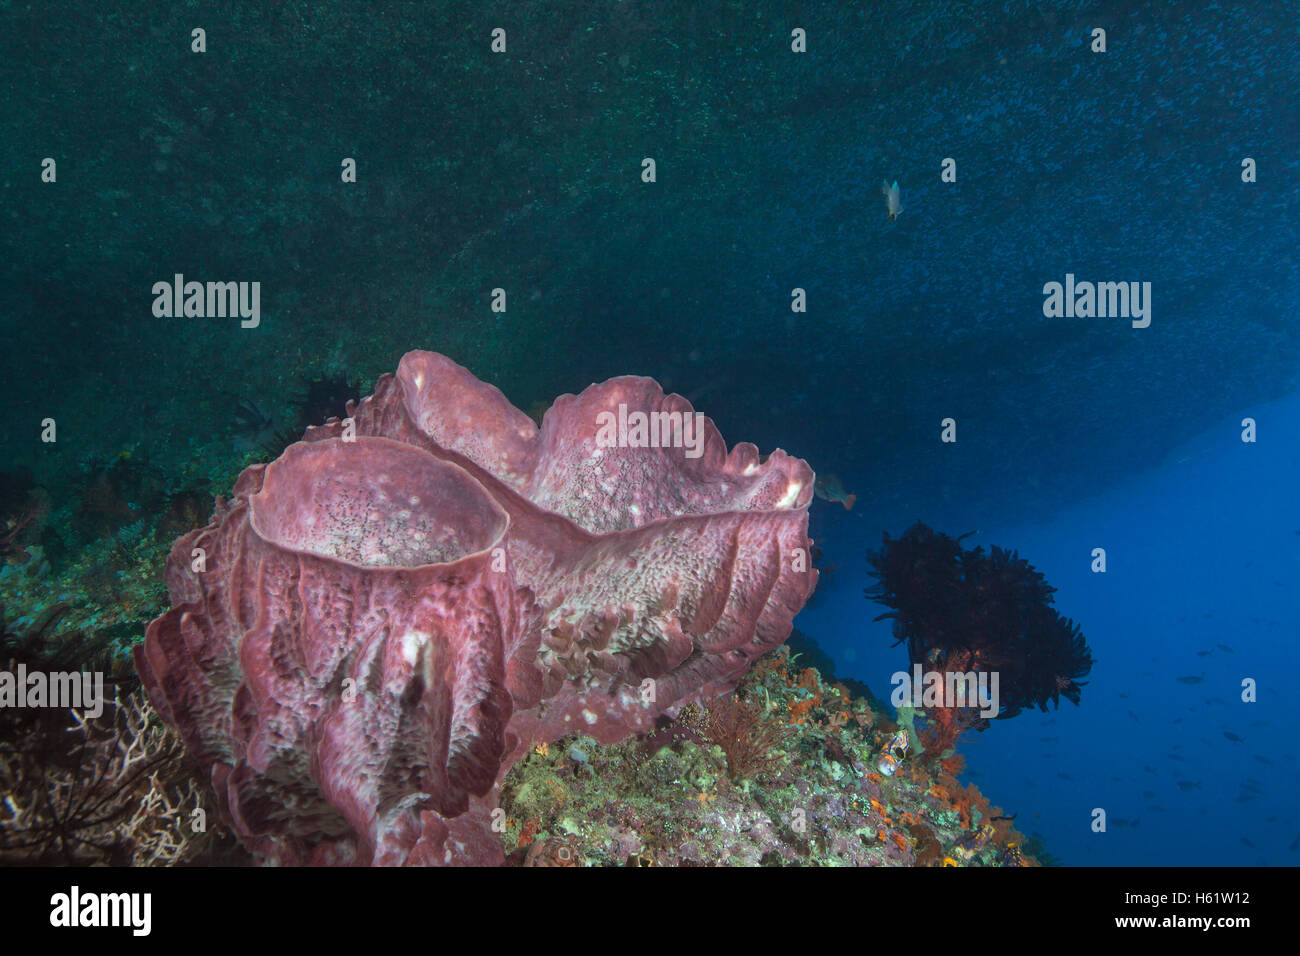 Red barrel sponges glow under the dome of a mushroom island. Stock Photo